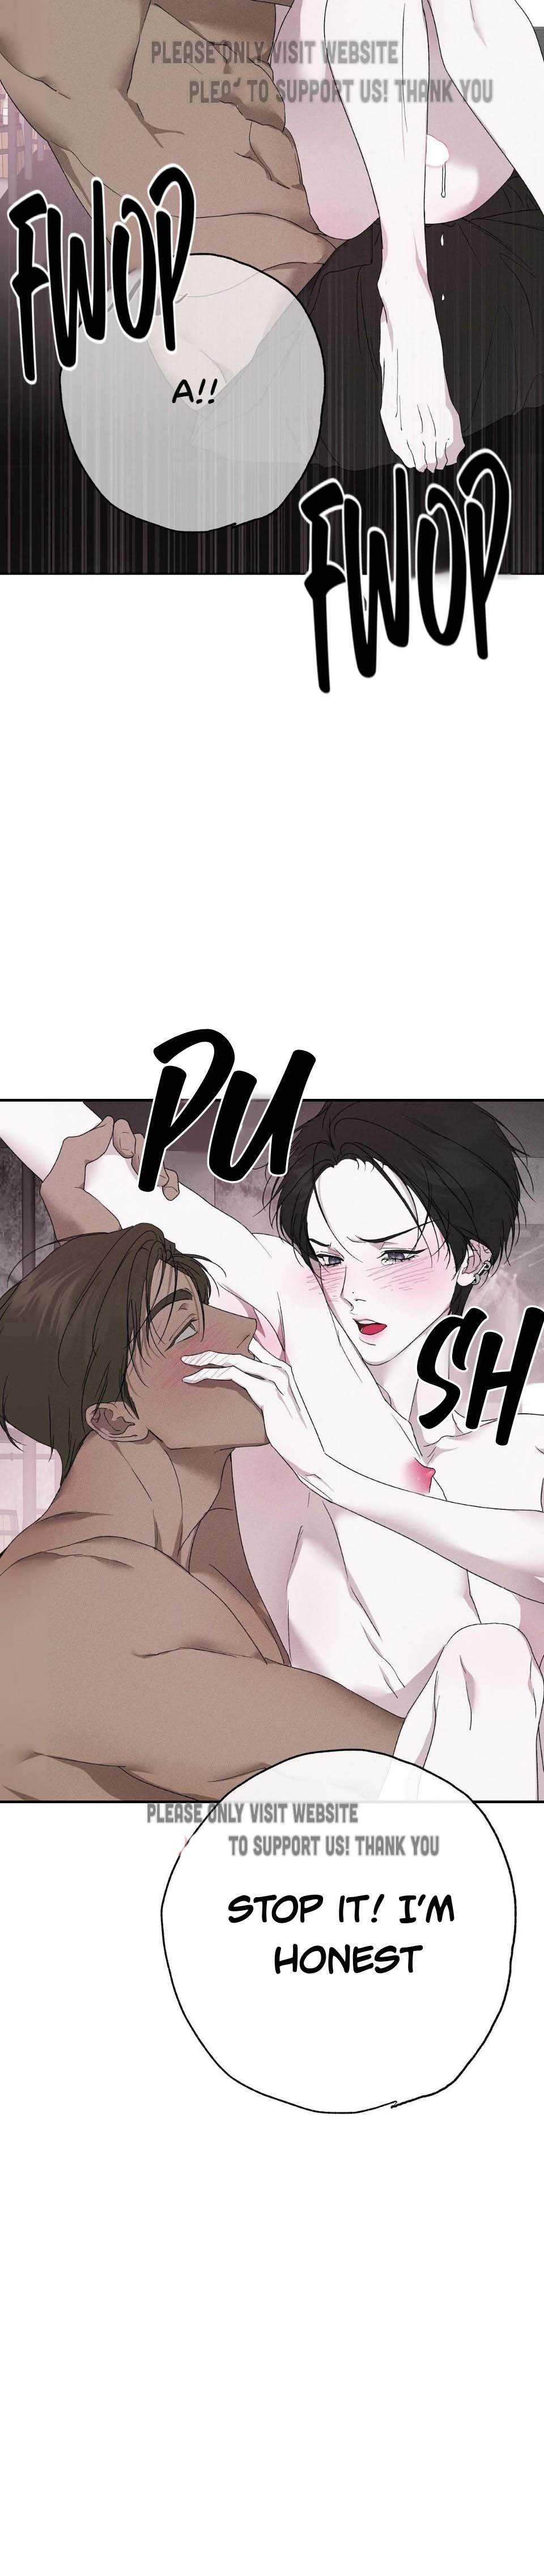 New bl manhwa / 5 chapters + prologue / Name: Love and Roll ! #lovea